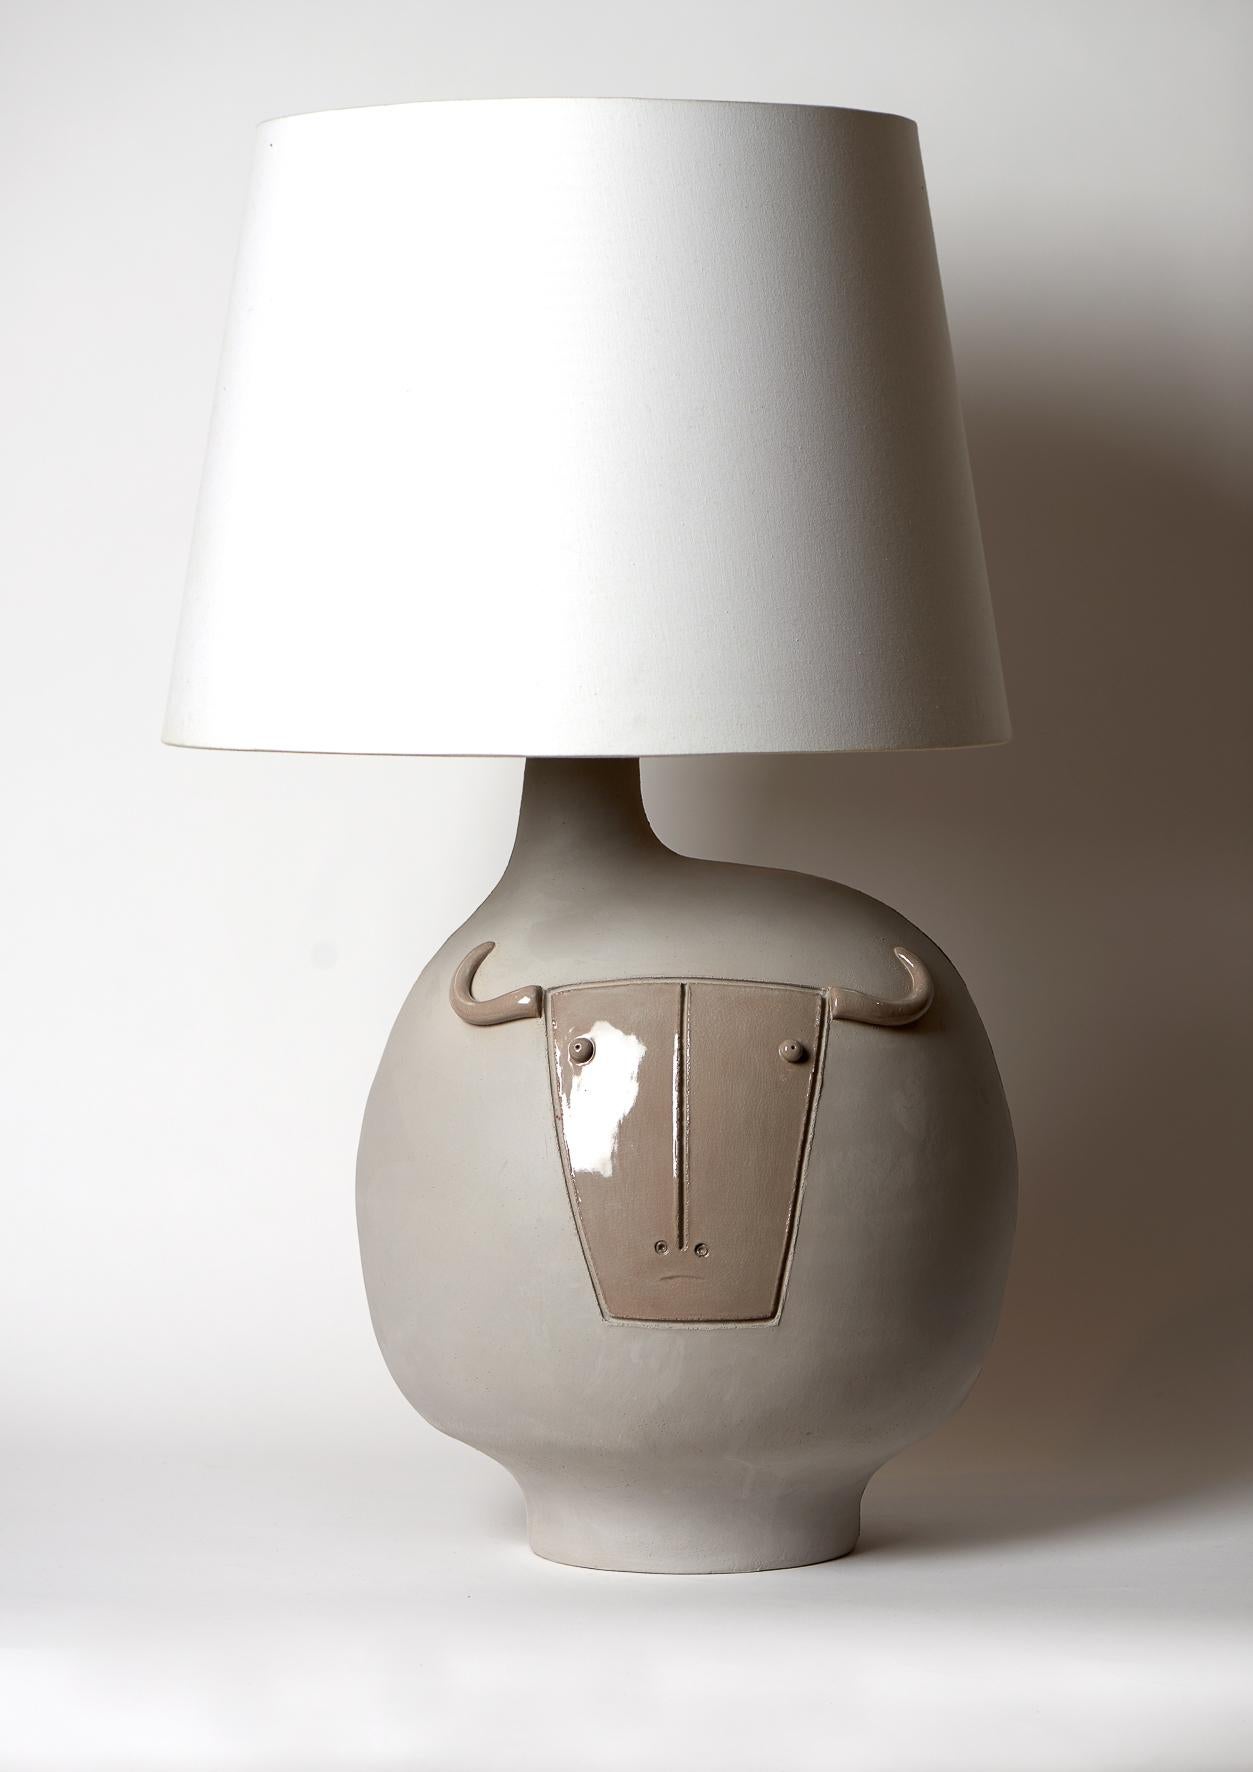 A sculptural lamp-base, natural warm grey stoneware, stylized form, decorated on front with a stylized Toro incised and over-glazed in shiny grey. Back in shiny grey too.

 One of a kind handmade piece, signed by the French ceramicists: Daniel and